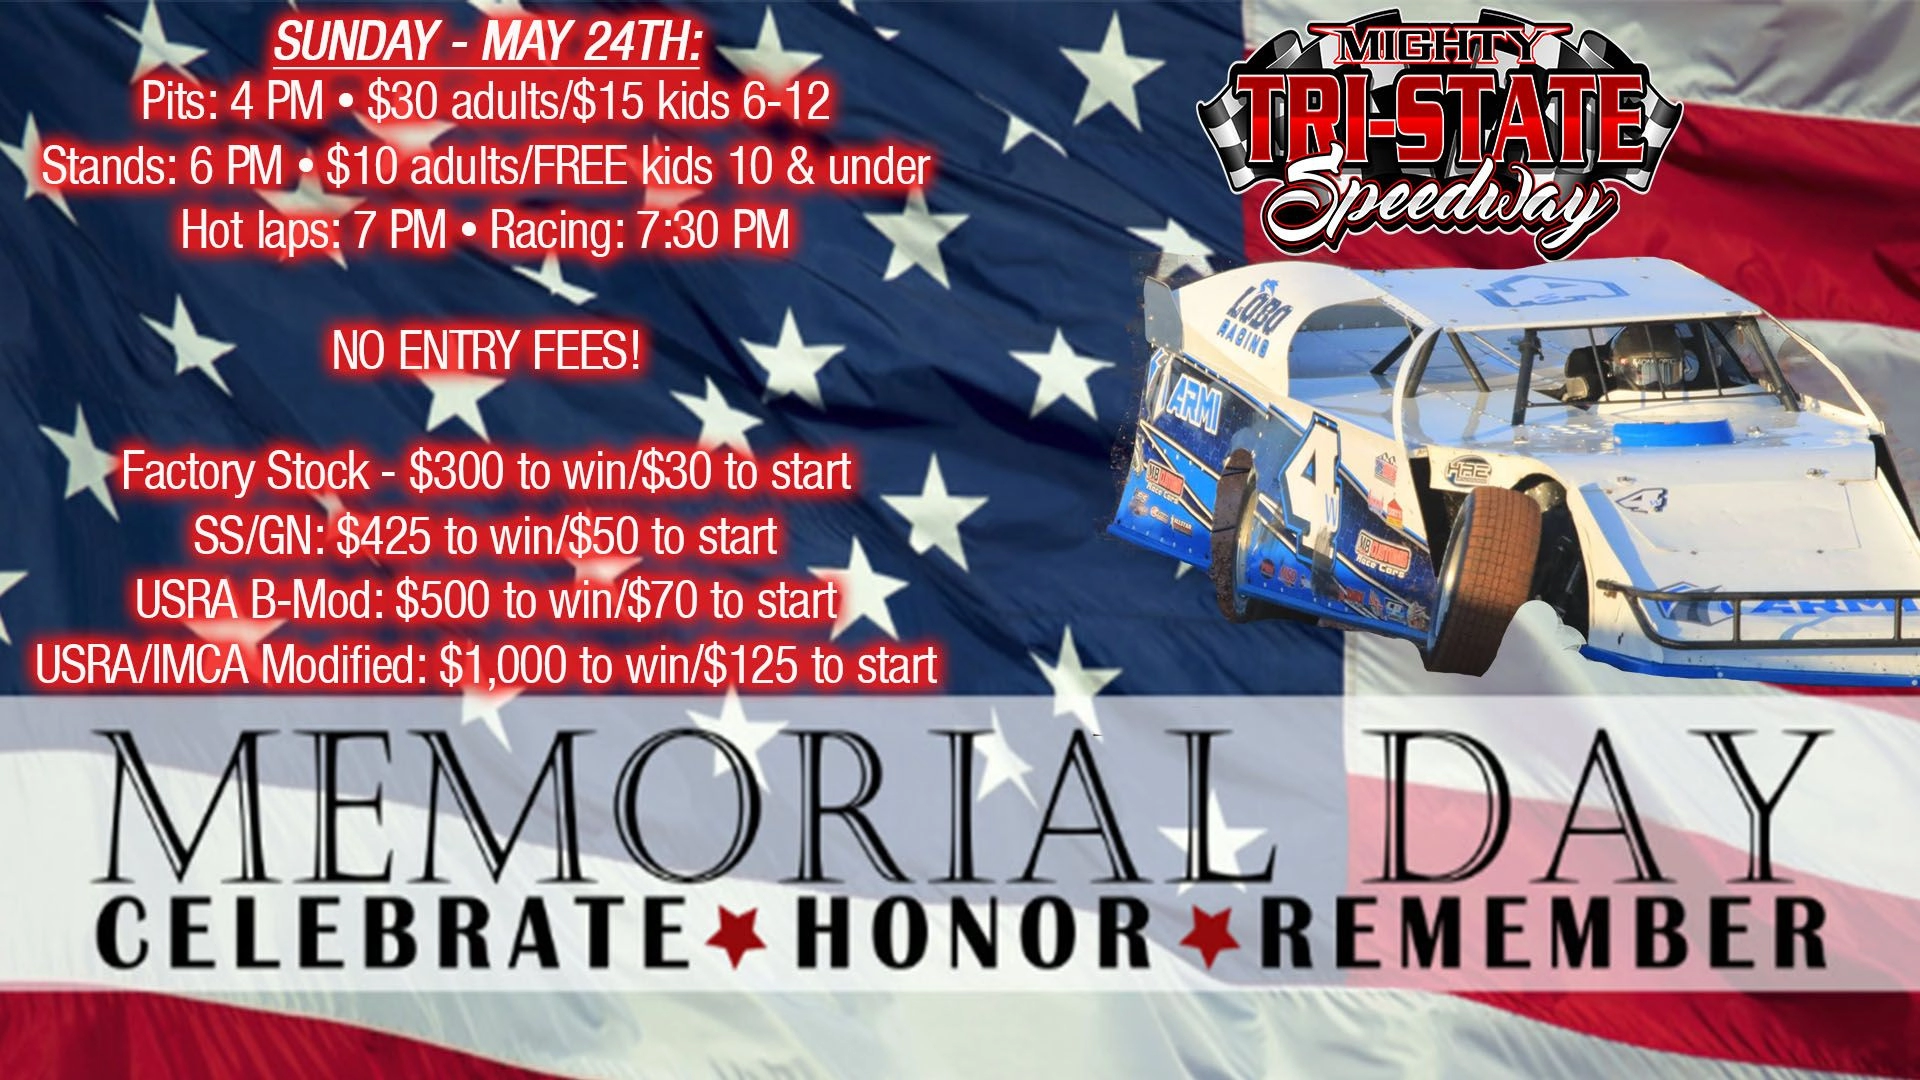 Memorial Day Weekend Races TriState Speedway